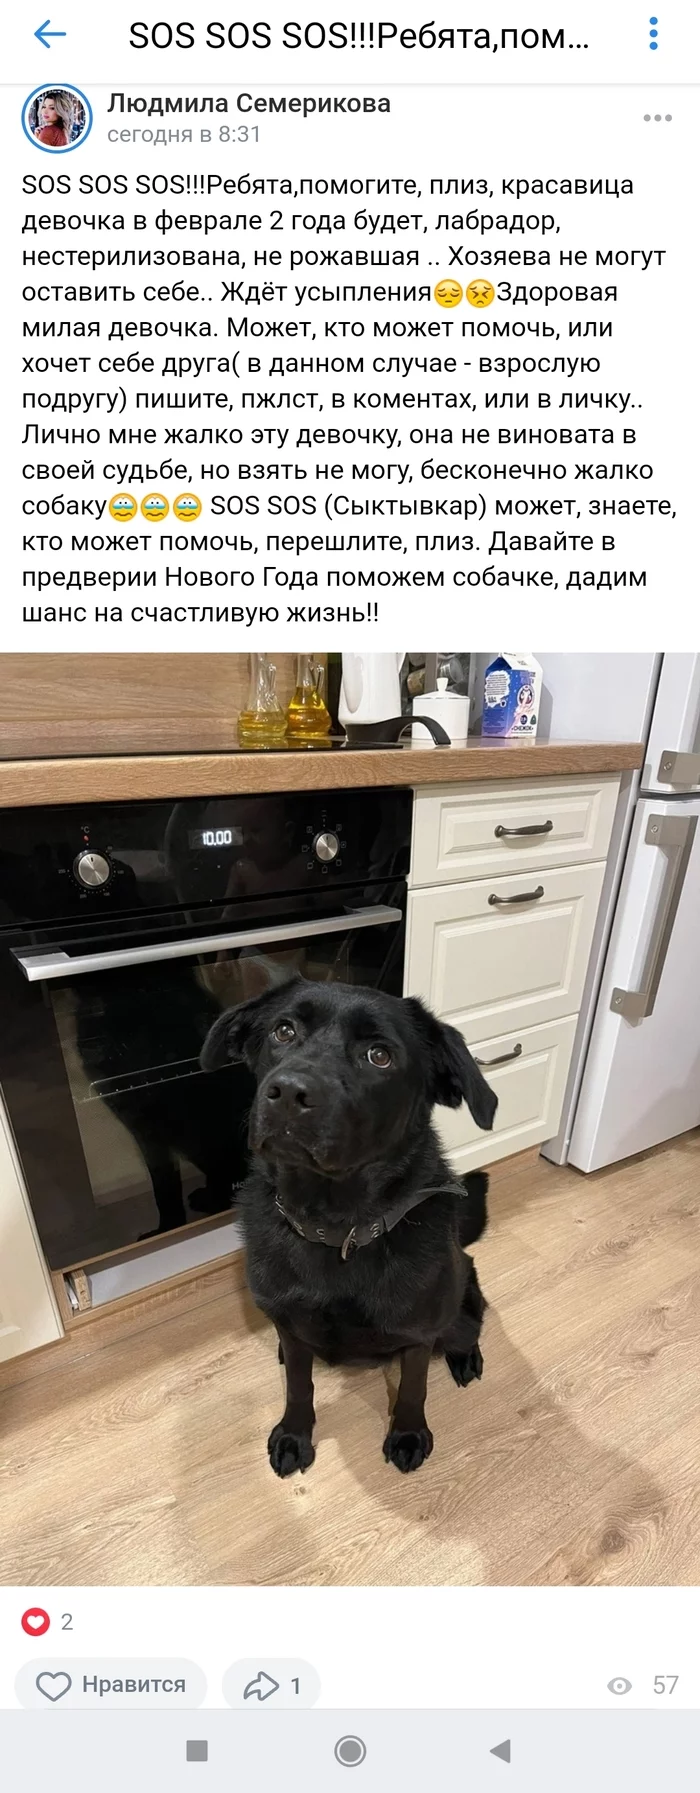 I found the owner) thank you all Guys from Syktyvkar, maybe someone wanted a beautiful Labrador for the new year or your child could be - Syktyvkar, Dog, Lulling to sleep, New Year's miracle, Longpost, In good hands, No rating